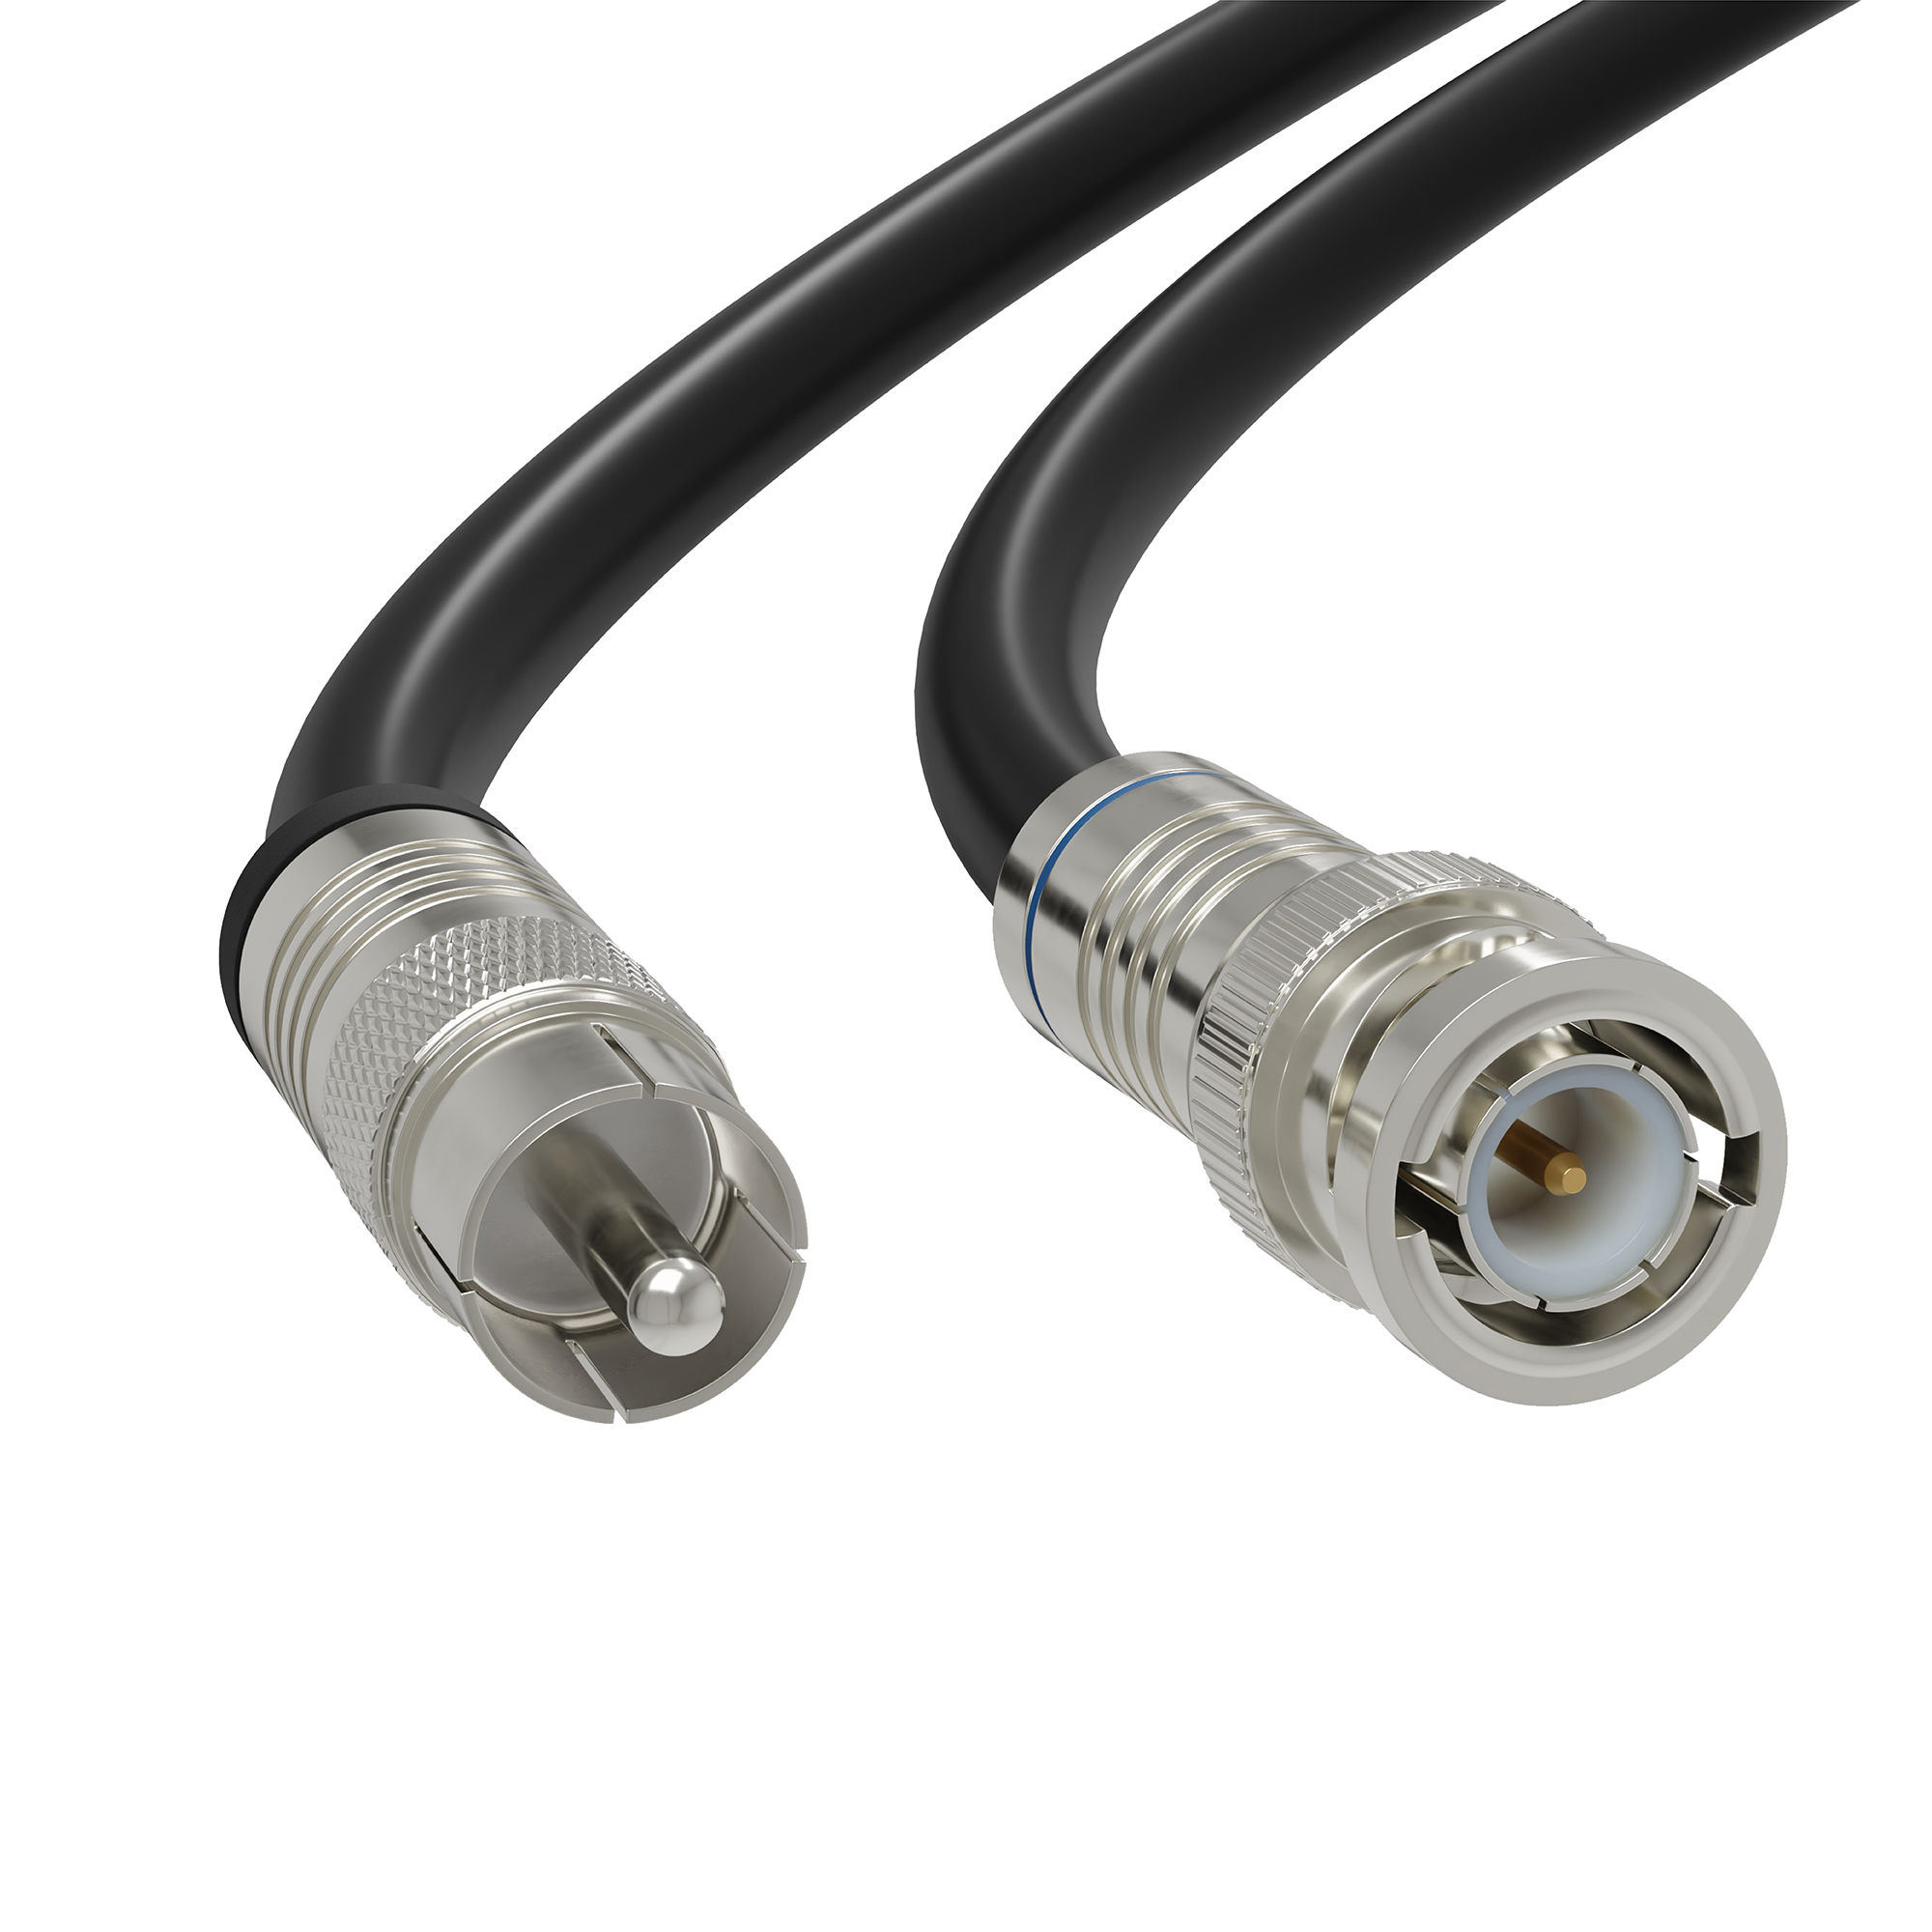 Black, 6 ft BNC to RCA RG6 Cable - Professional Grade - Male BNC to Male RCA Cable  - BNC Cable - 75 Ohm Coaxial, 50/75 Ohm Connectors, SDI, HD-SDI, CCTV, Camera, and More - 6 Feet Long, in Black - image 1 of 10